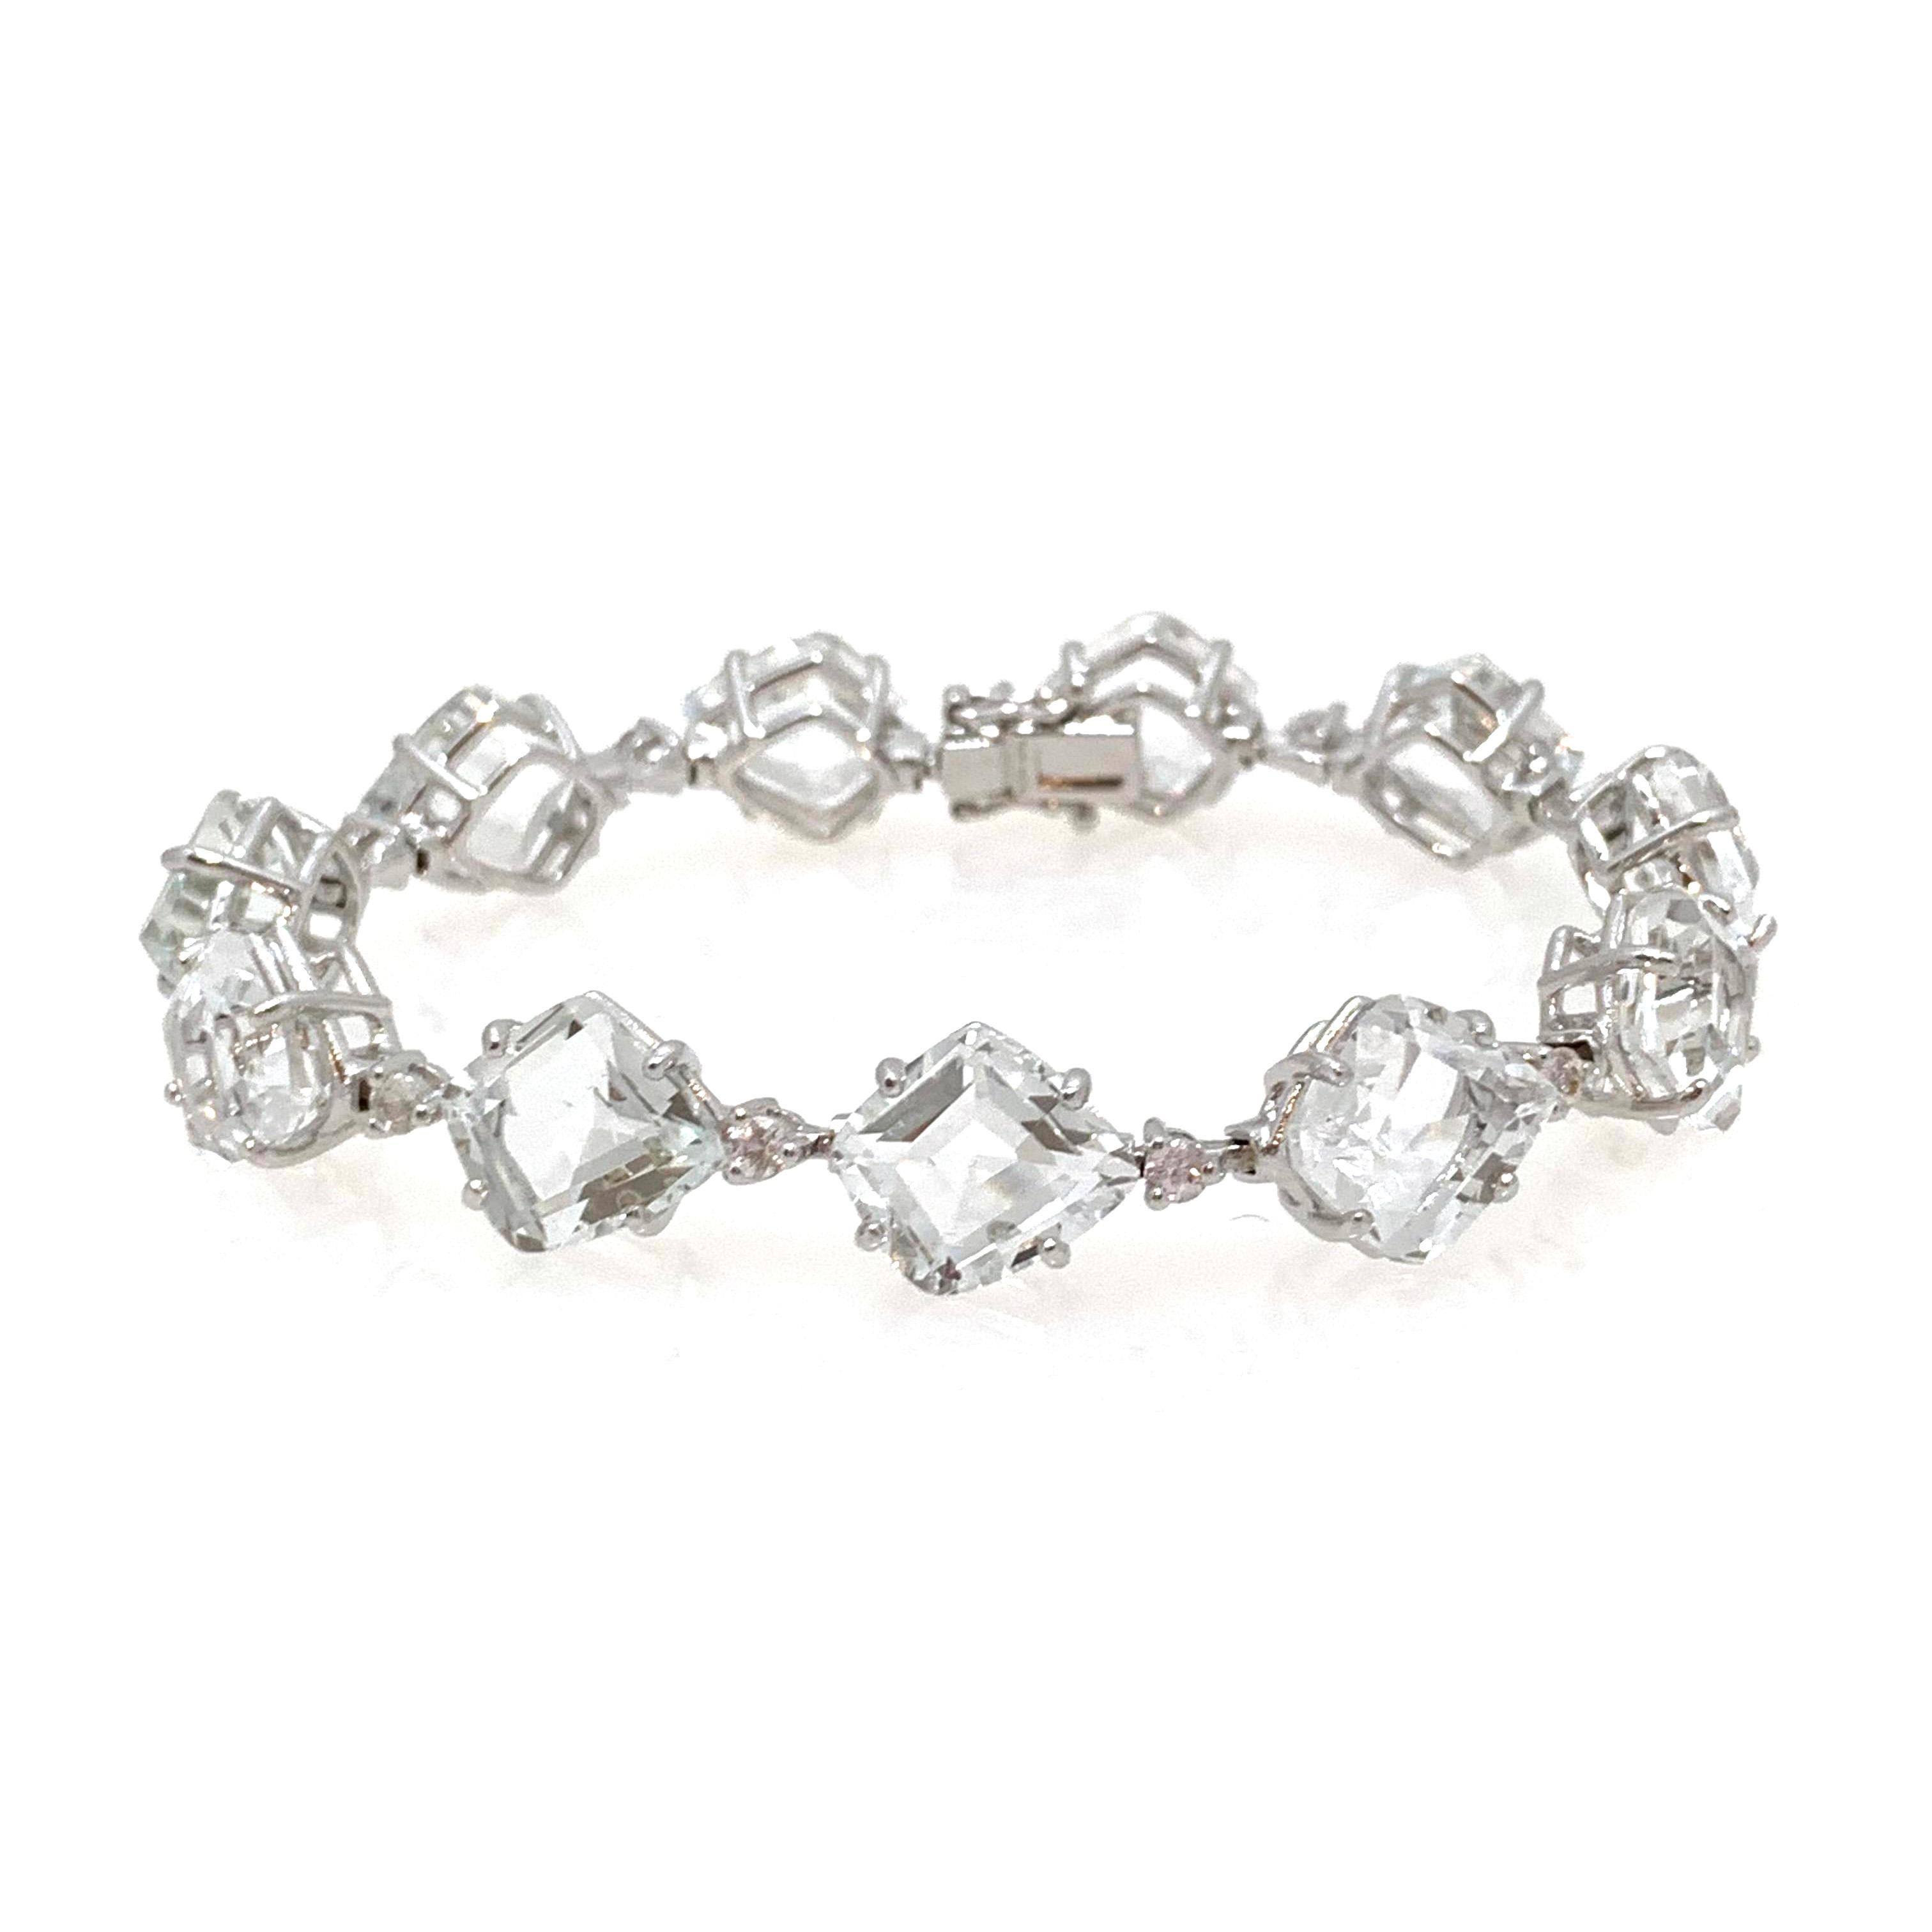 Classic with a twist! Fancy-cut White Topaz and White Sapphire Tennis Bracelet.

This bracelet features 22pcs of genuine fancy-cut white topaz and round white sapphire, handset in platinum rhodium plate sterling silver, push clasp with '8' safety